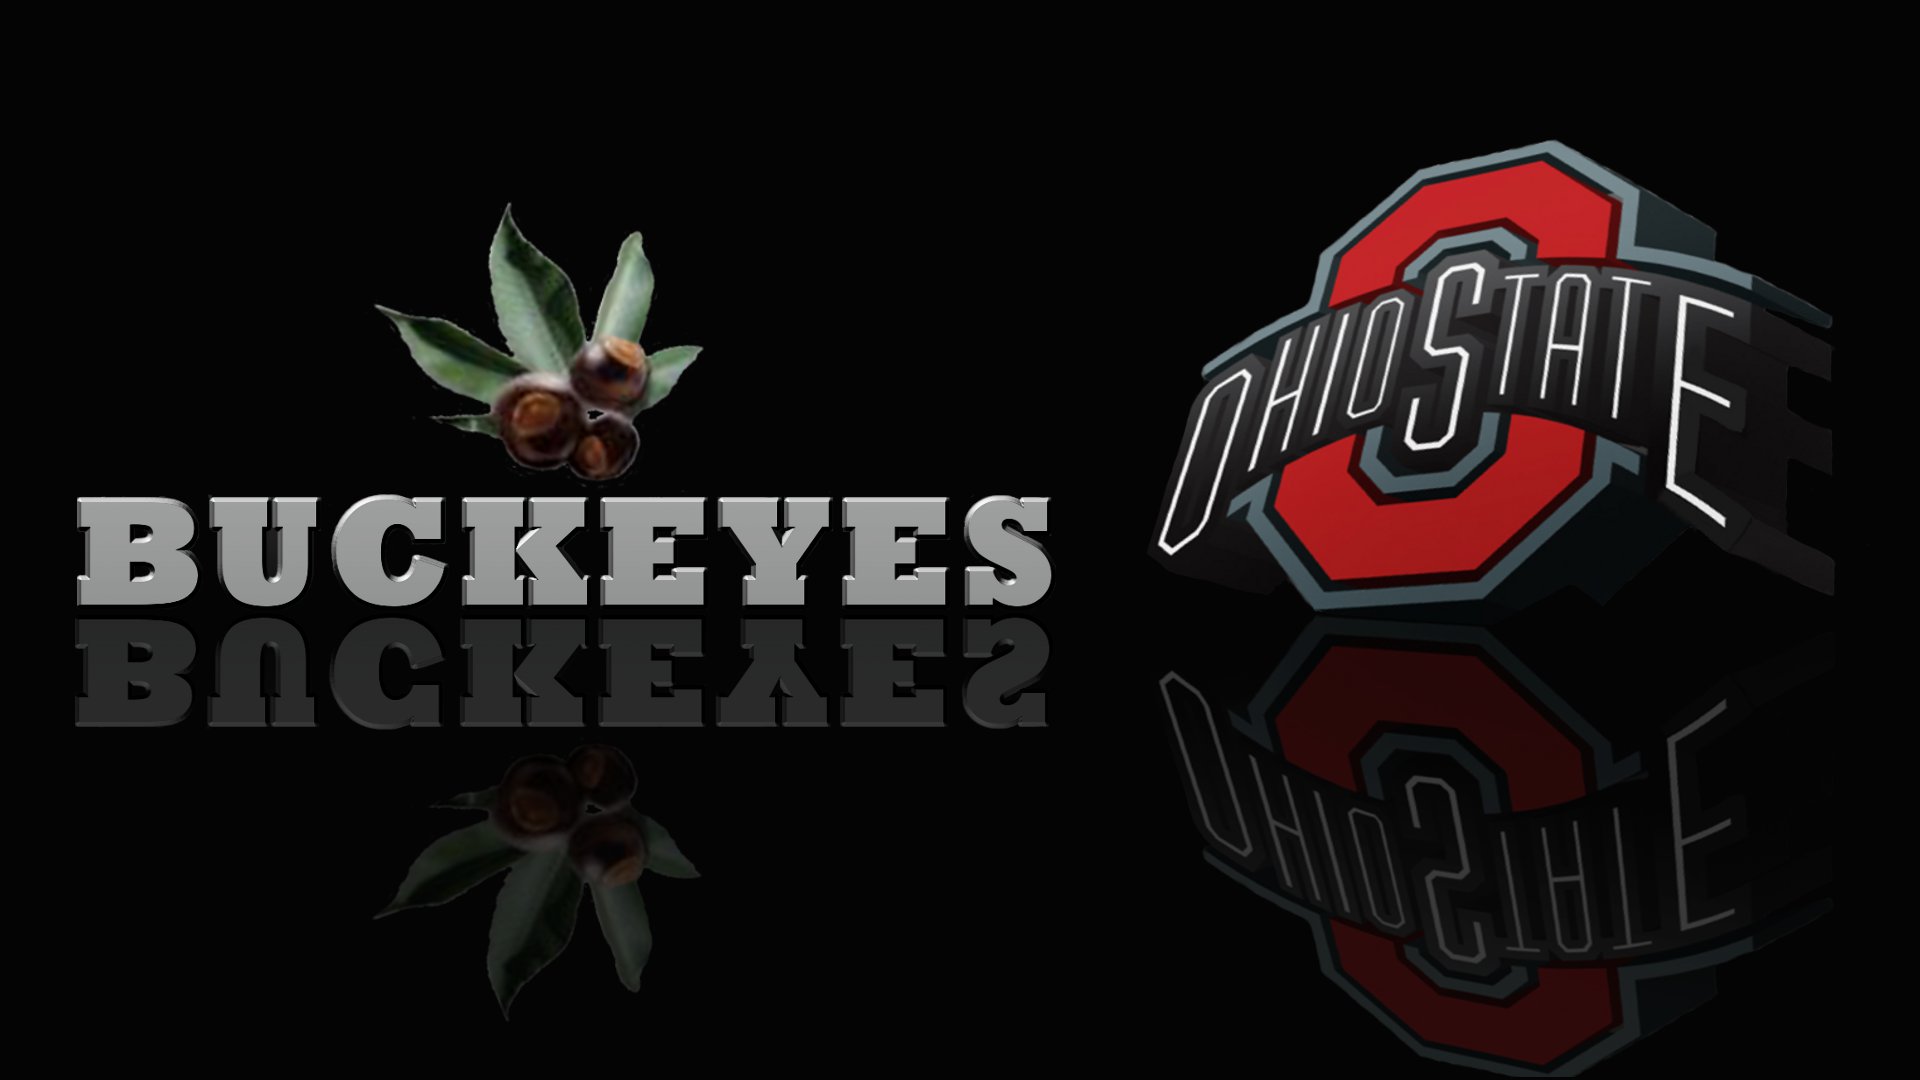 Download image Ohio State Football Screensaver PC Android iPhone and